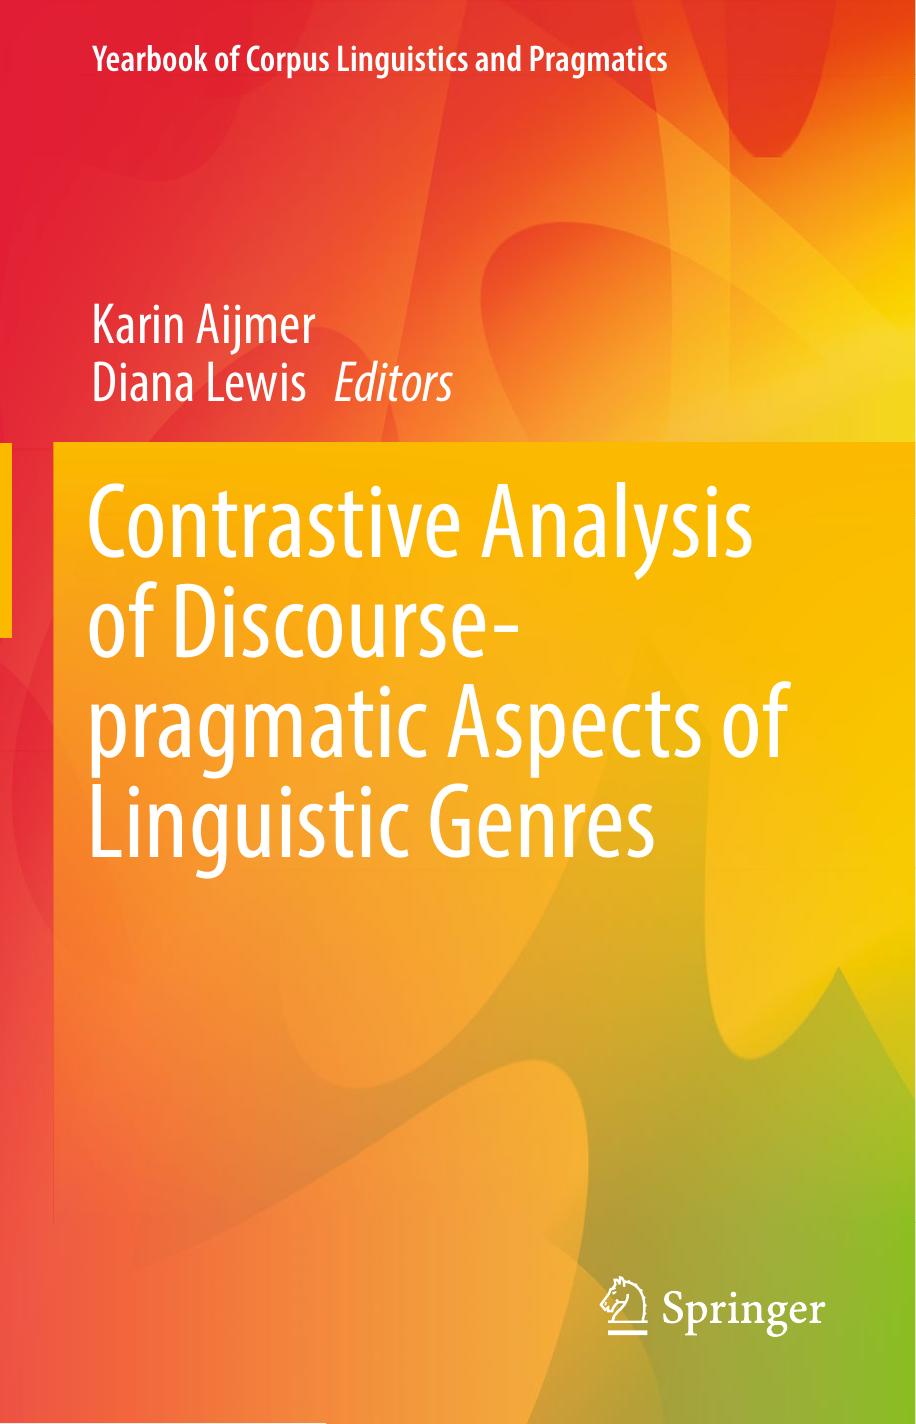 Contrastive Analysis of Discourse-pragmatic Aspects of Linguistic Genres 2017